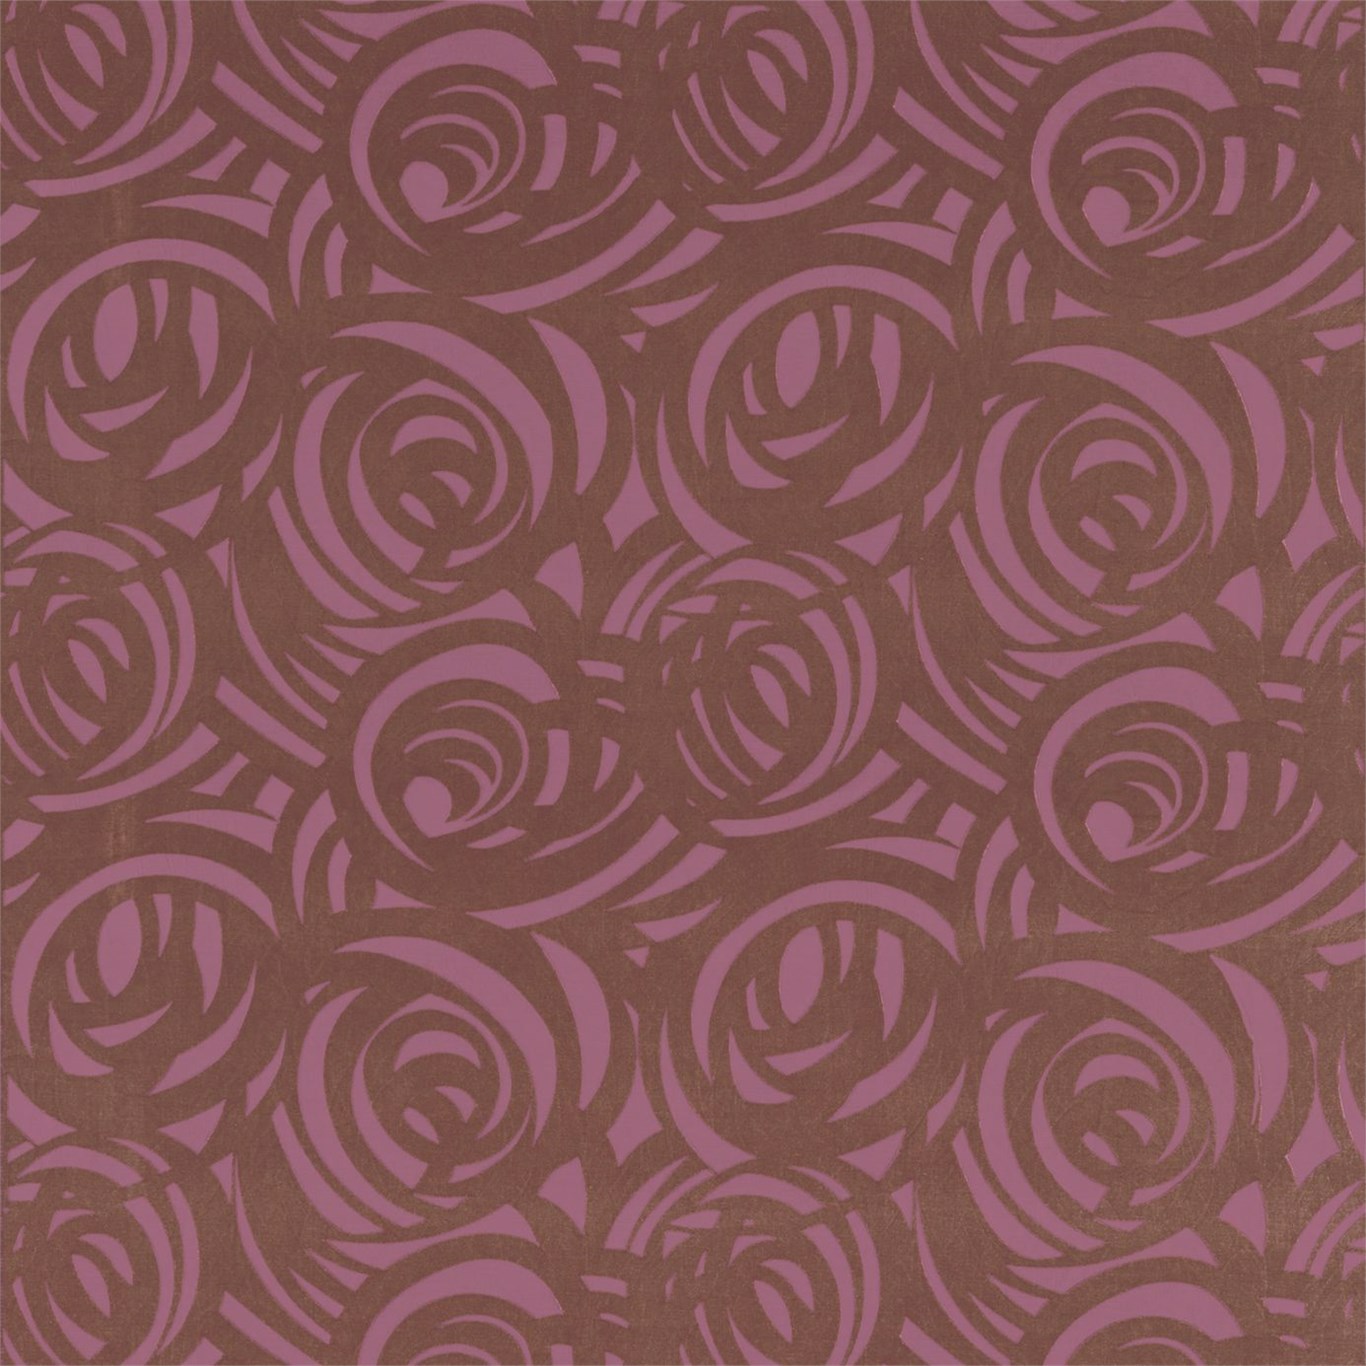 Vortex Coffee and Rose Pink Fabric by HAR